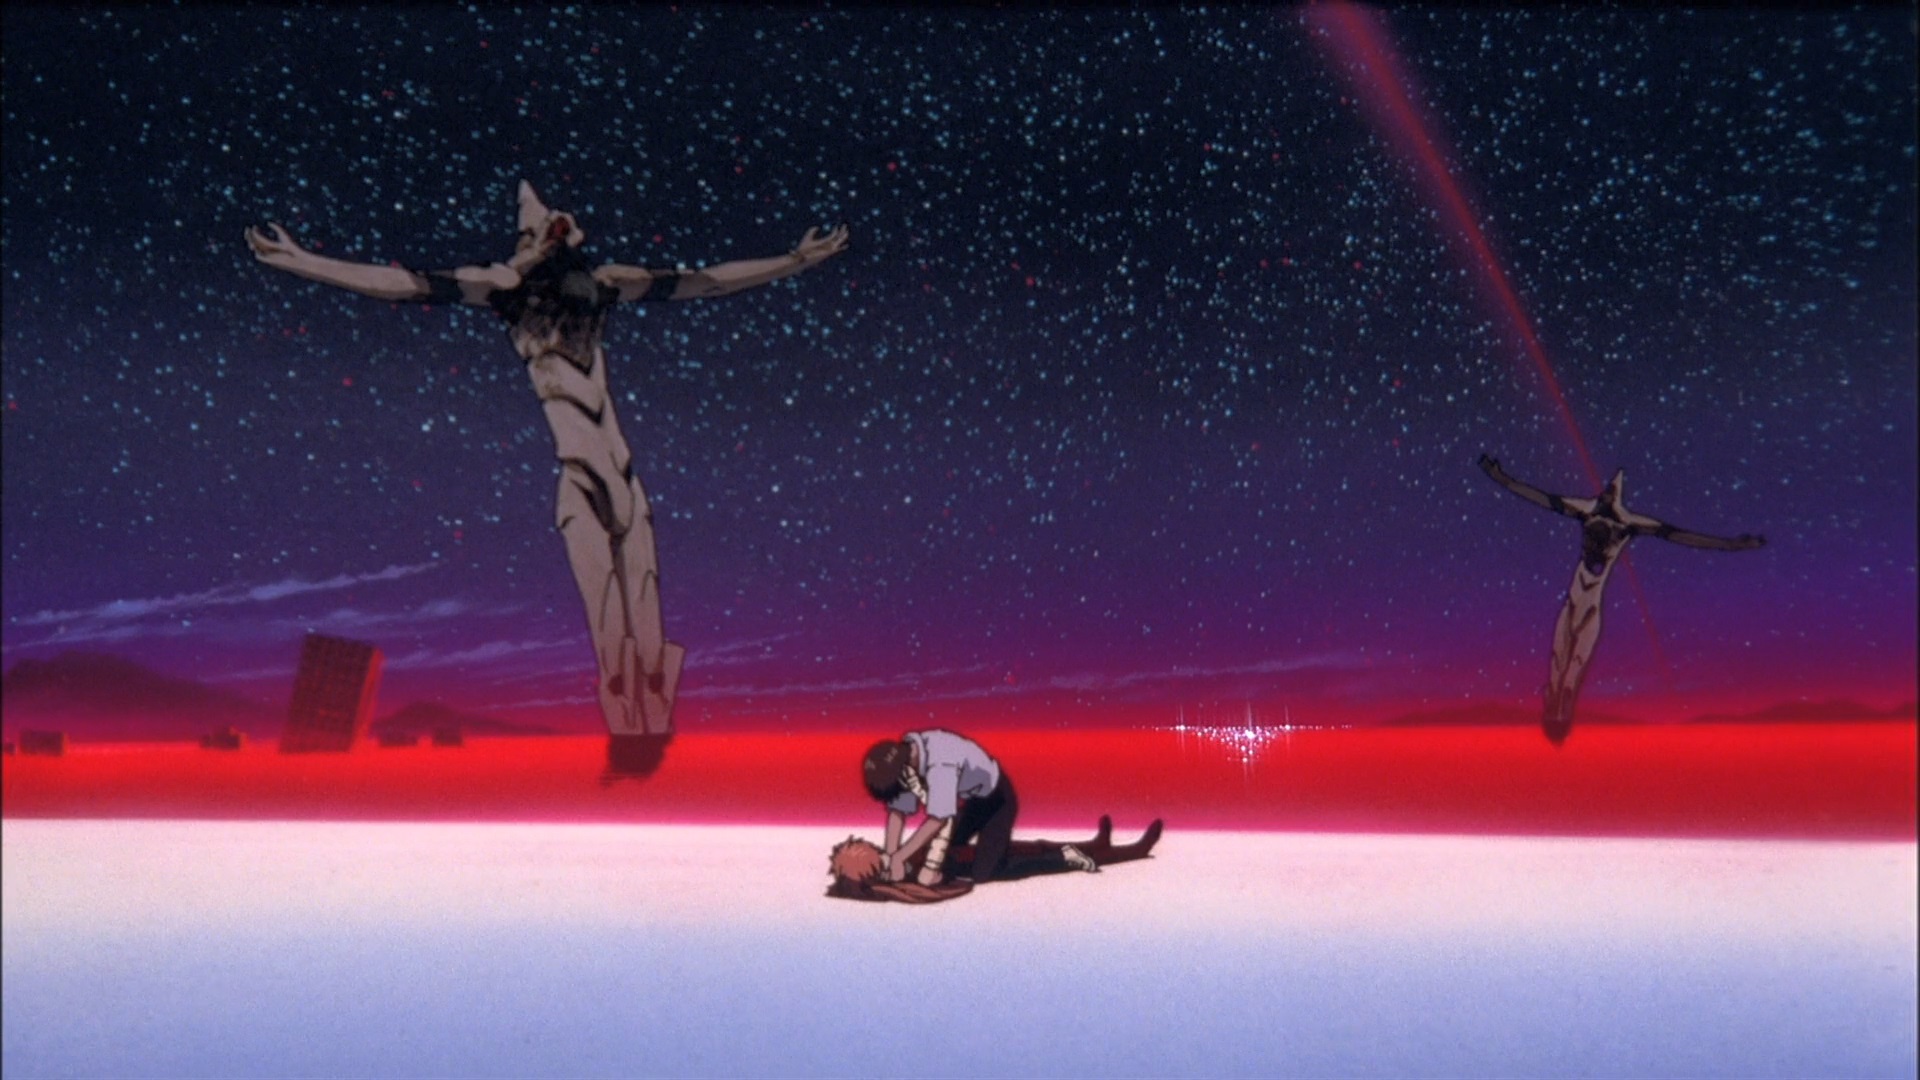 End Of Evangelion 1920X1080 Wallpapers